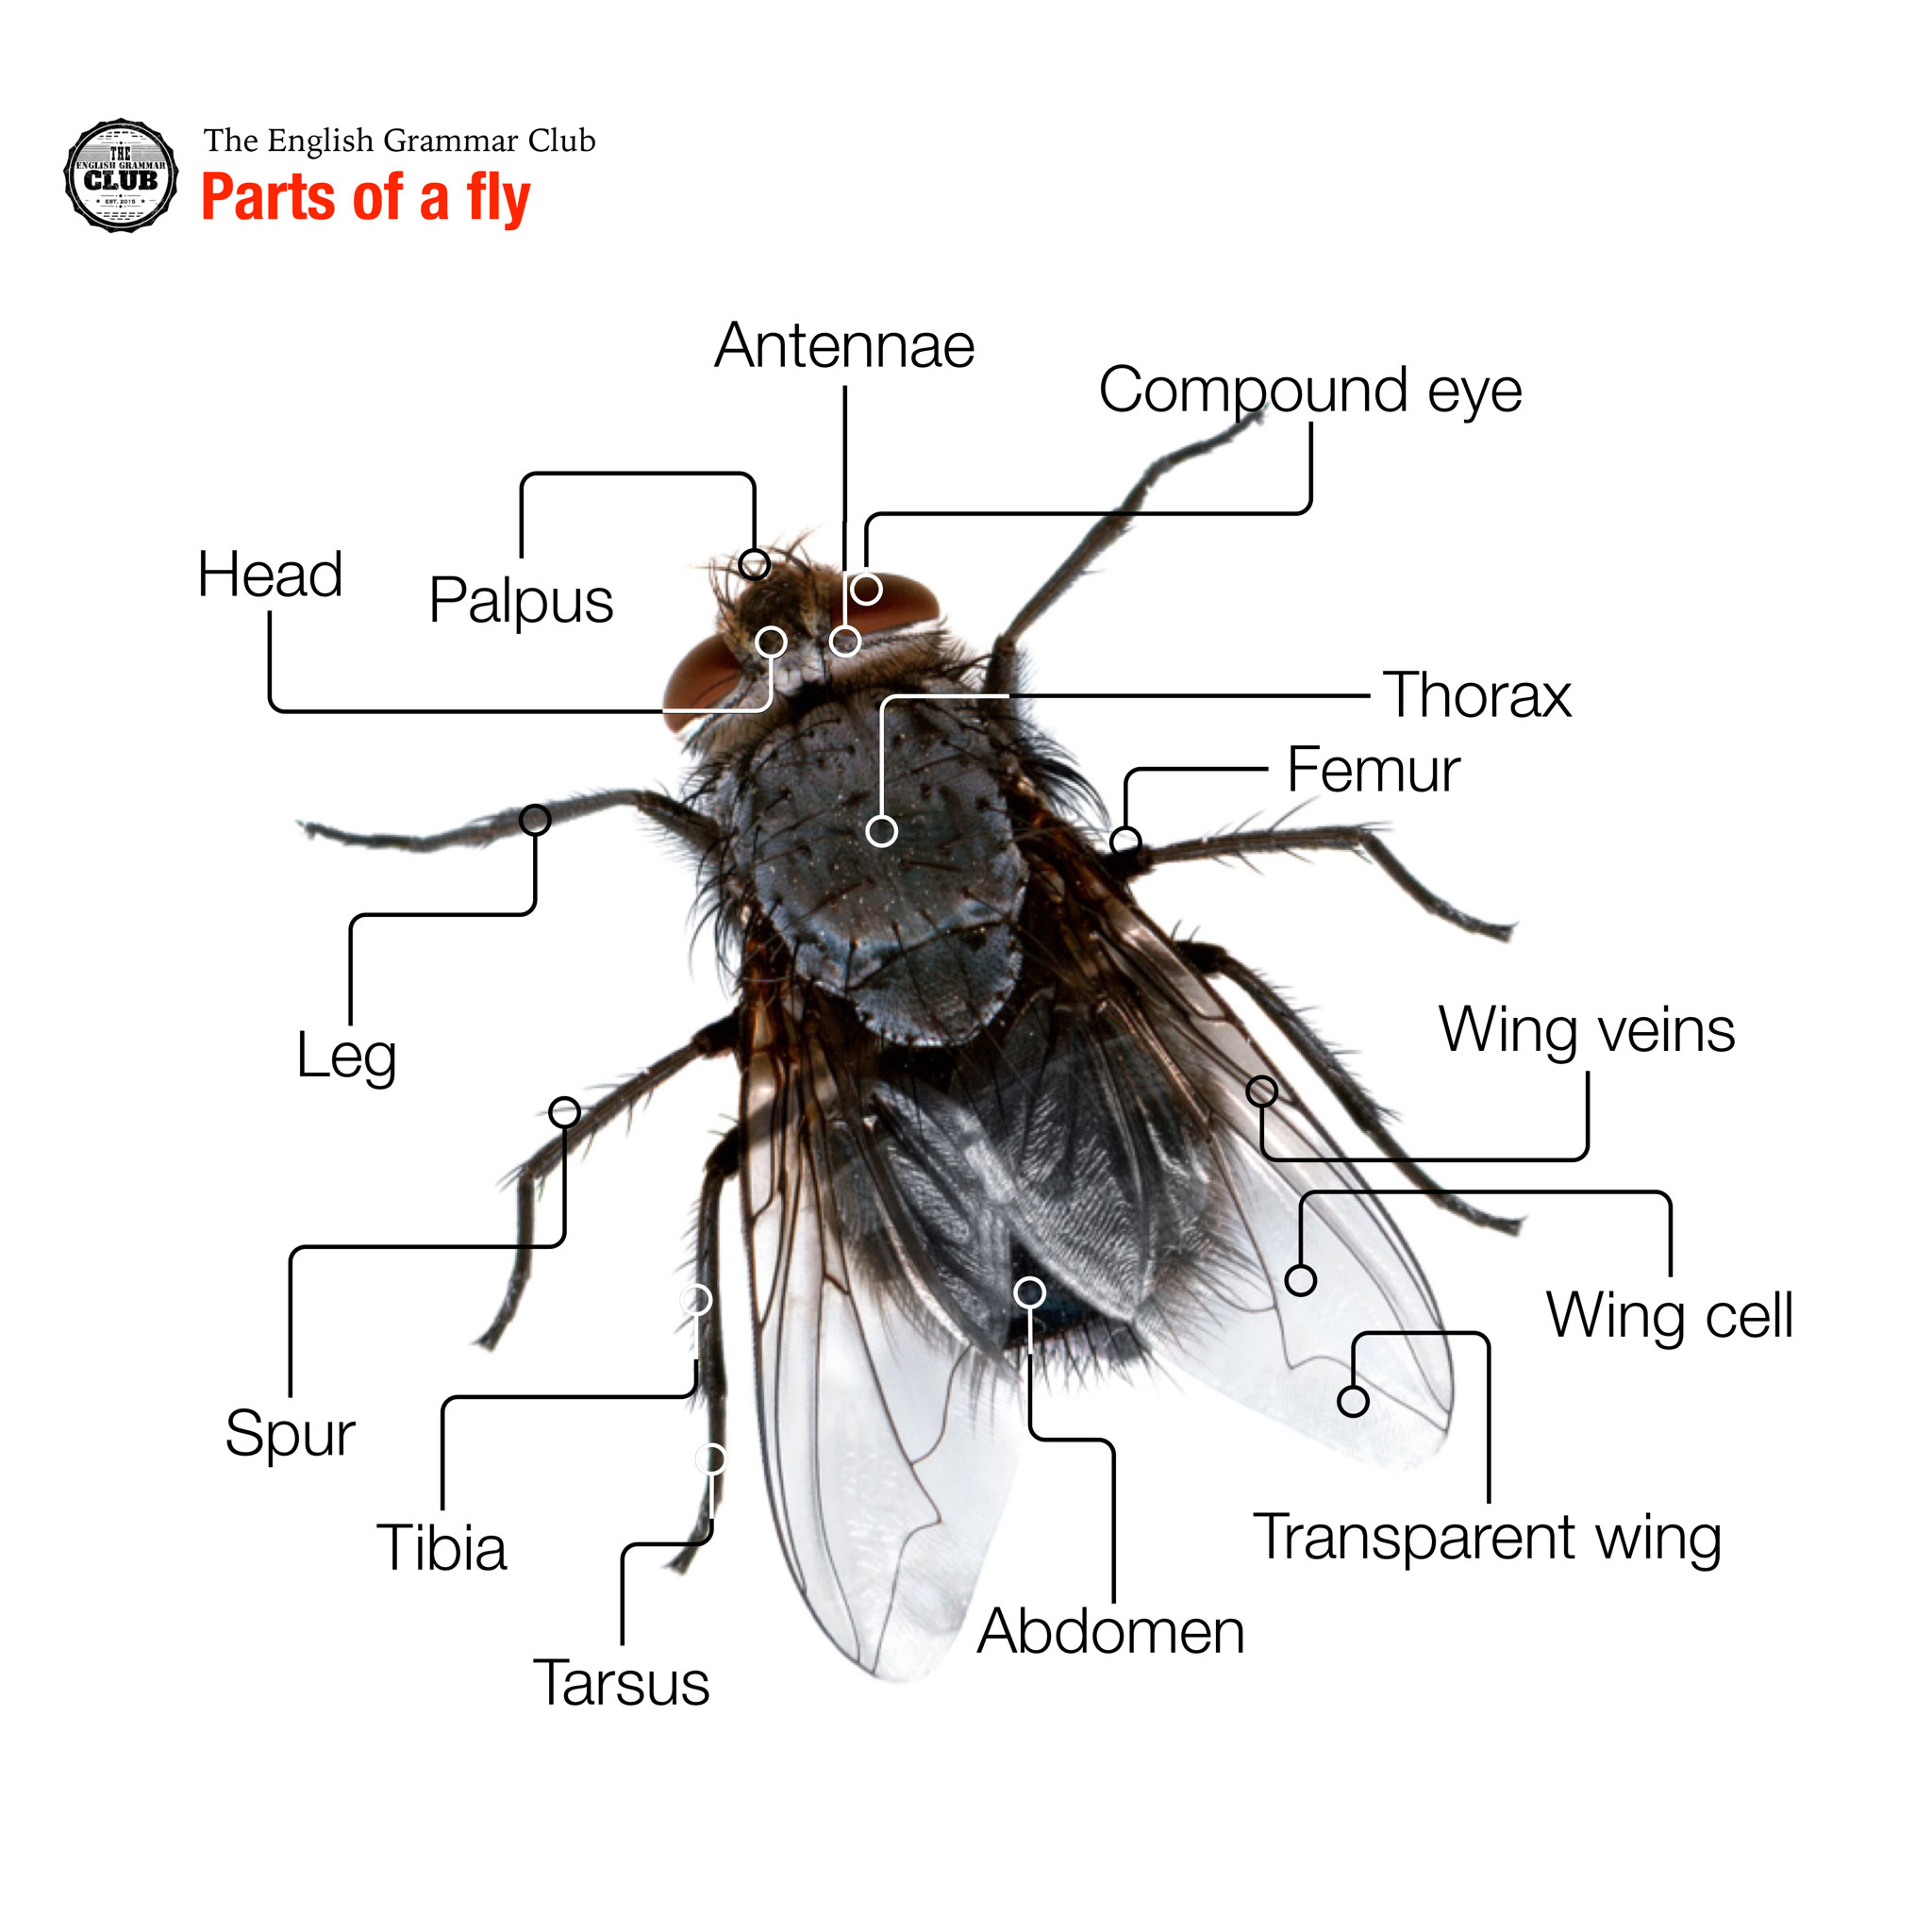 parts-of-a-fly-grammar-tips